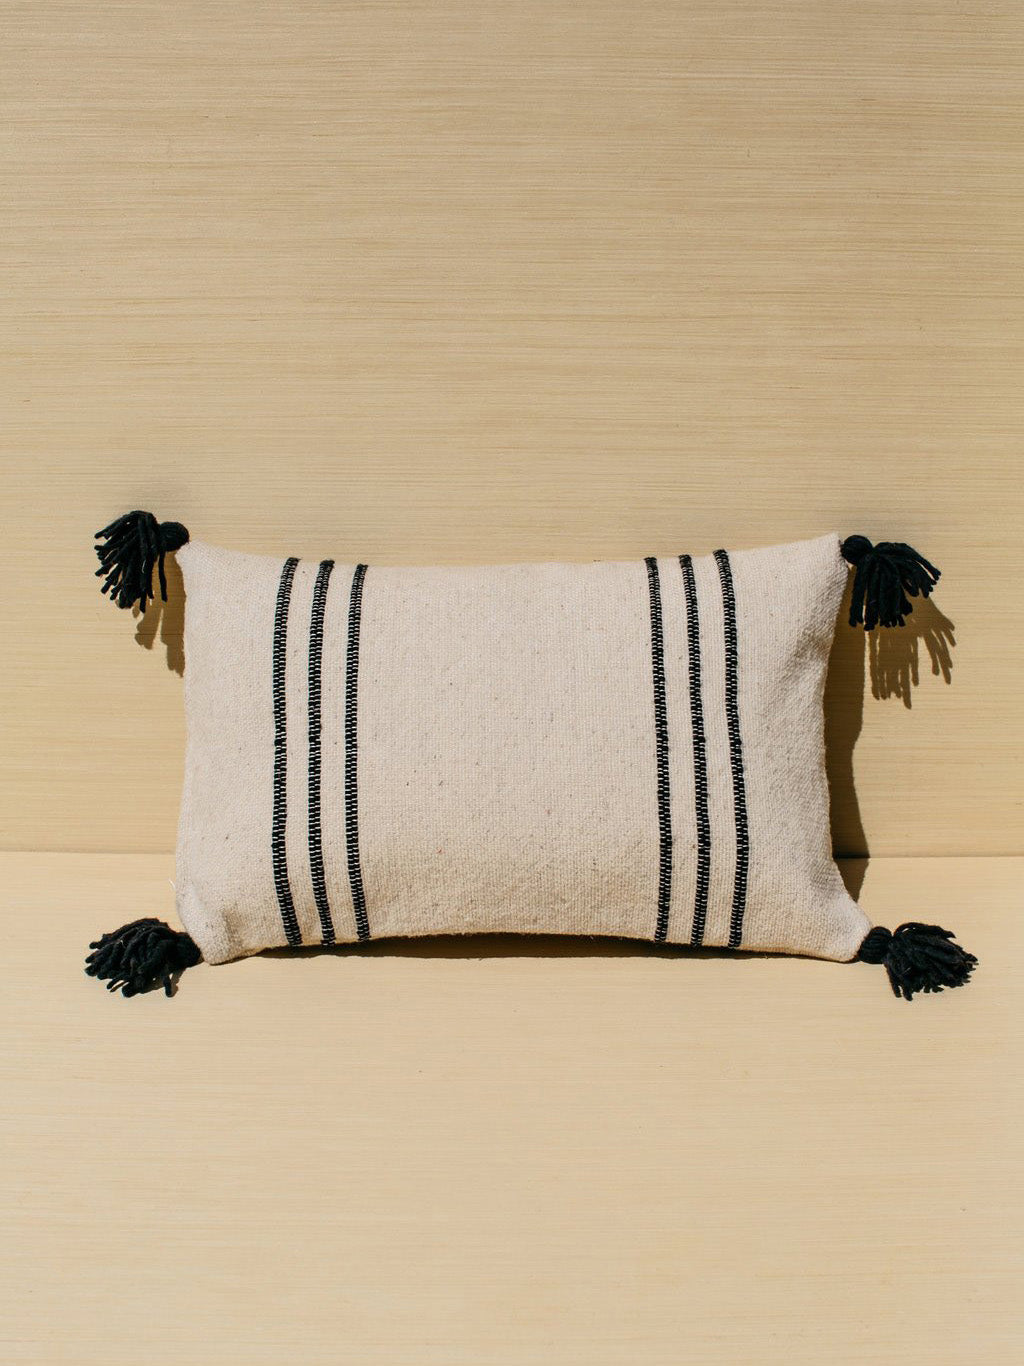 Tres Rayos Pillow Cover